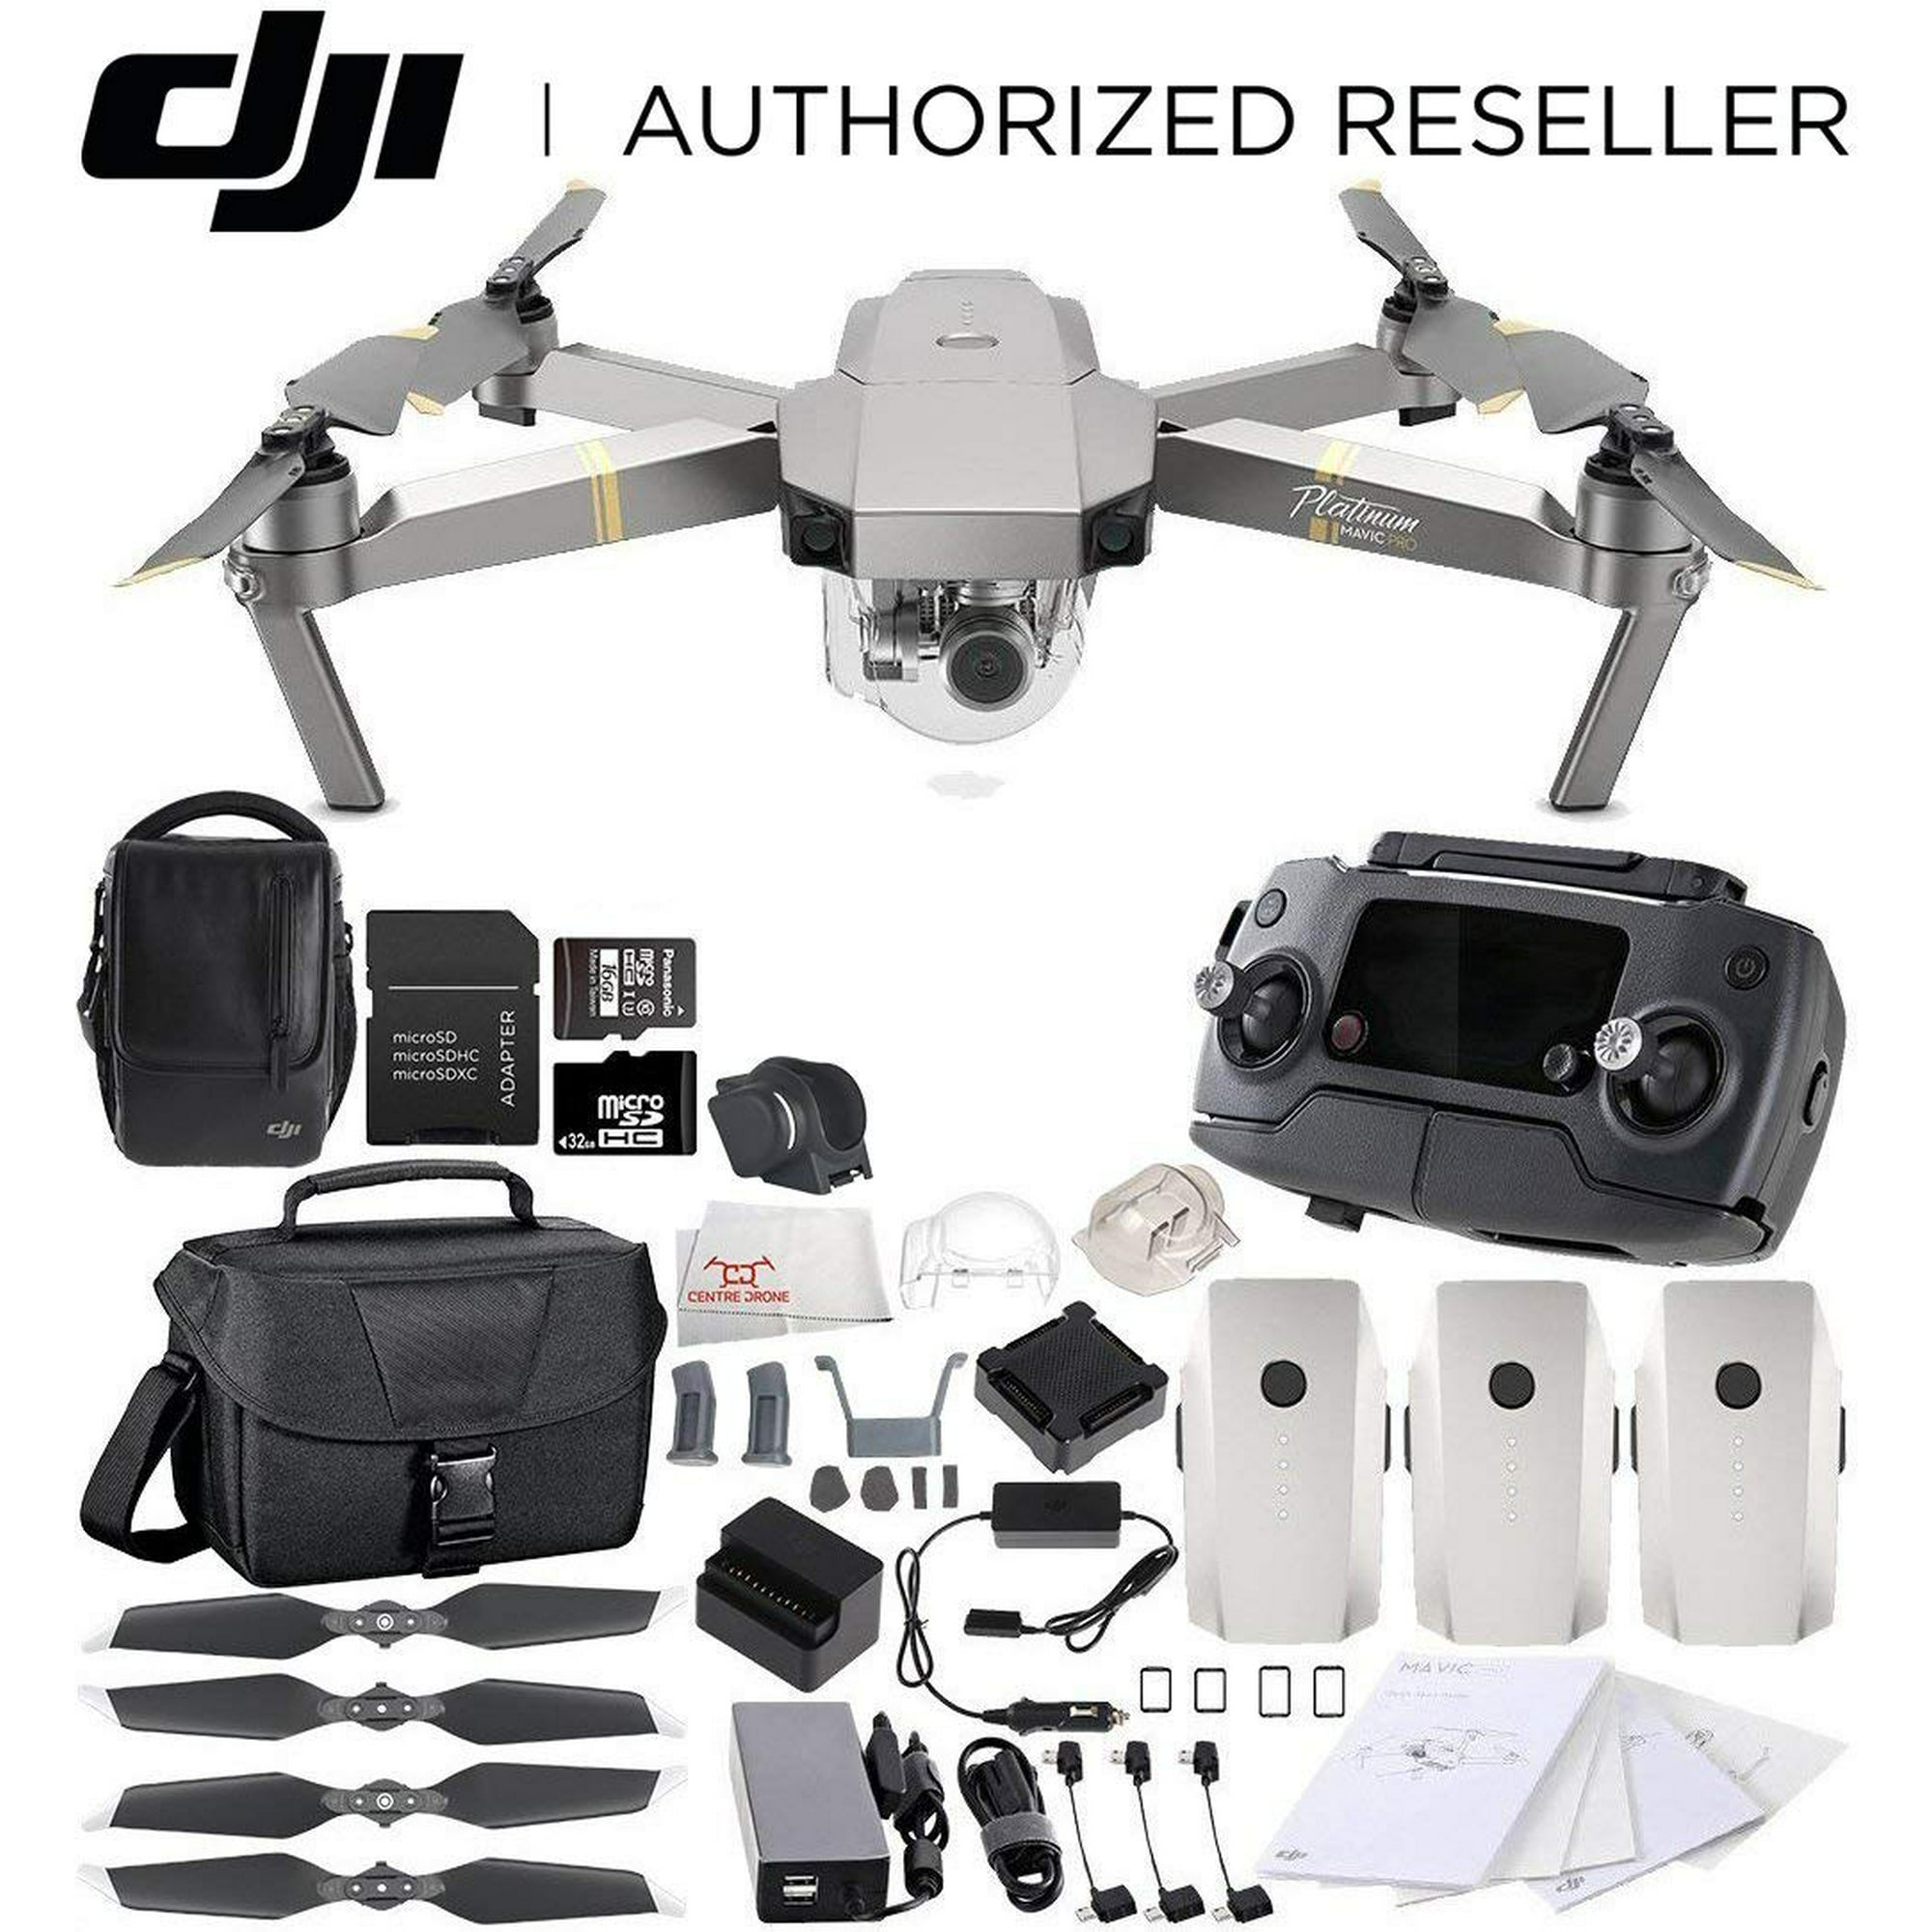 DJI Mavic Pro Platinum FLY MORE COMBO Collapsible Quadcopter